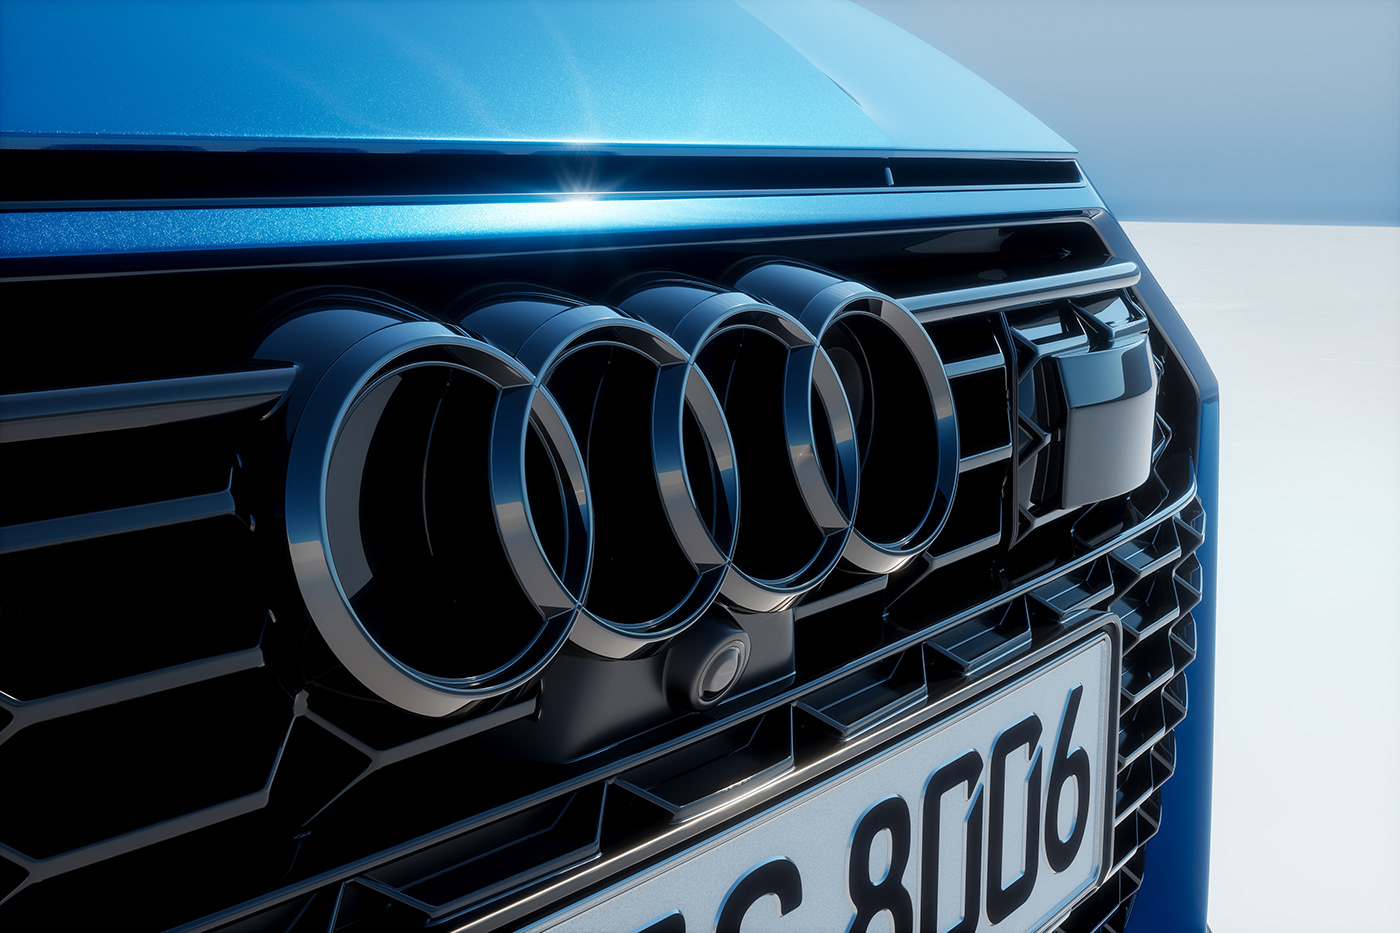 the front bumper close up for audi car with dark chrome audi rings.